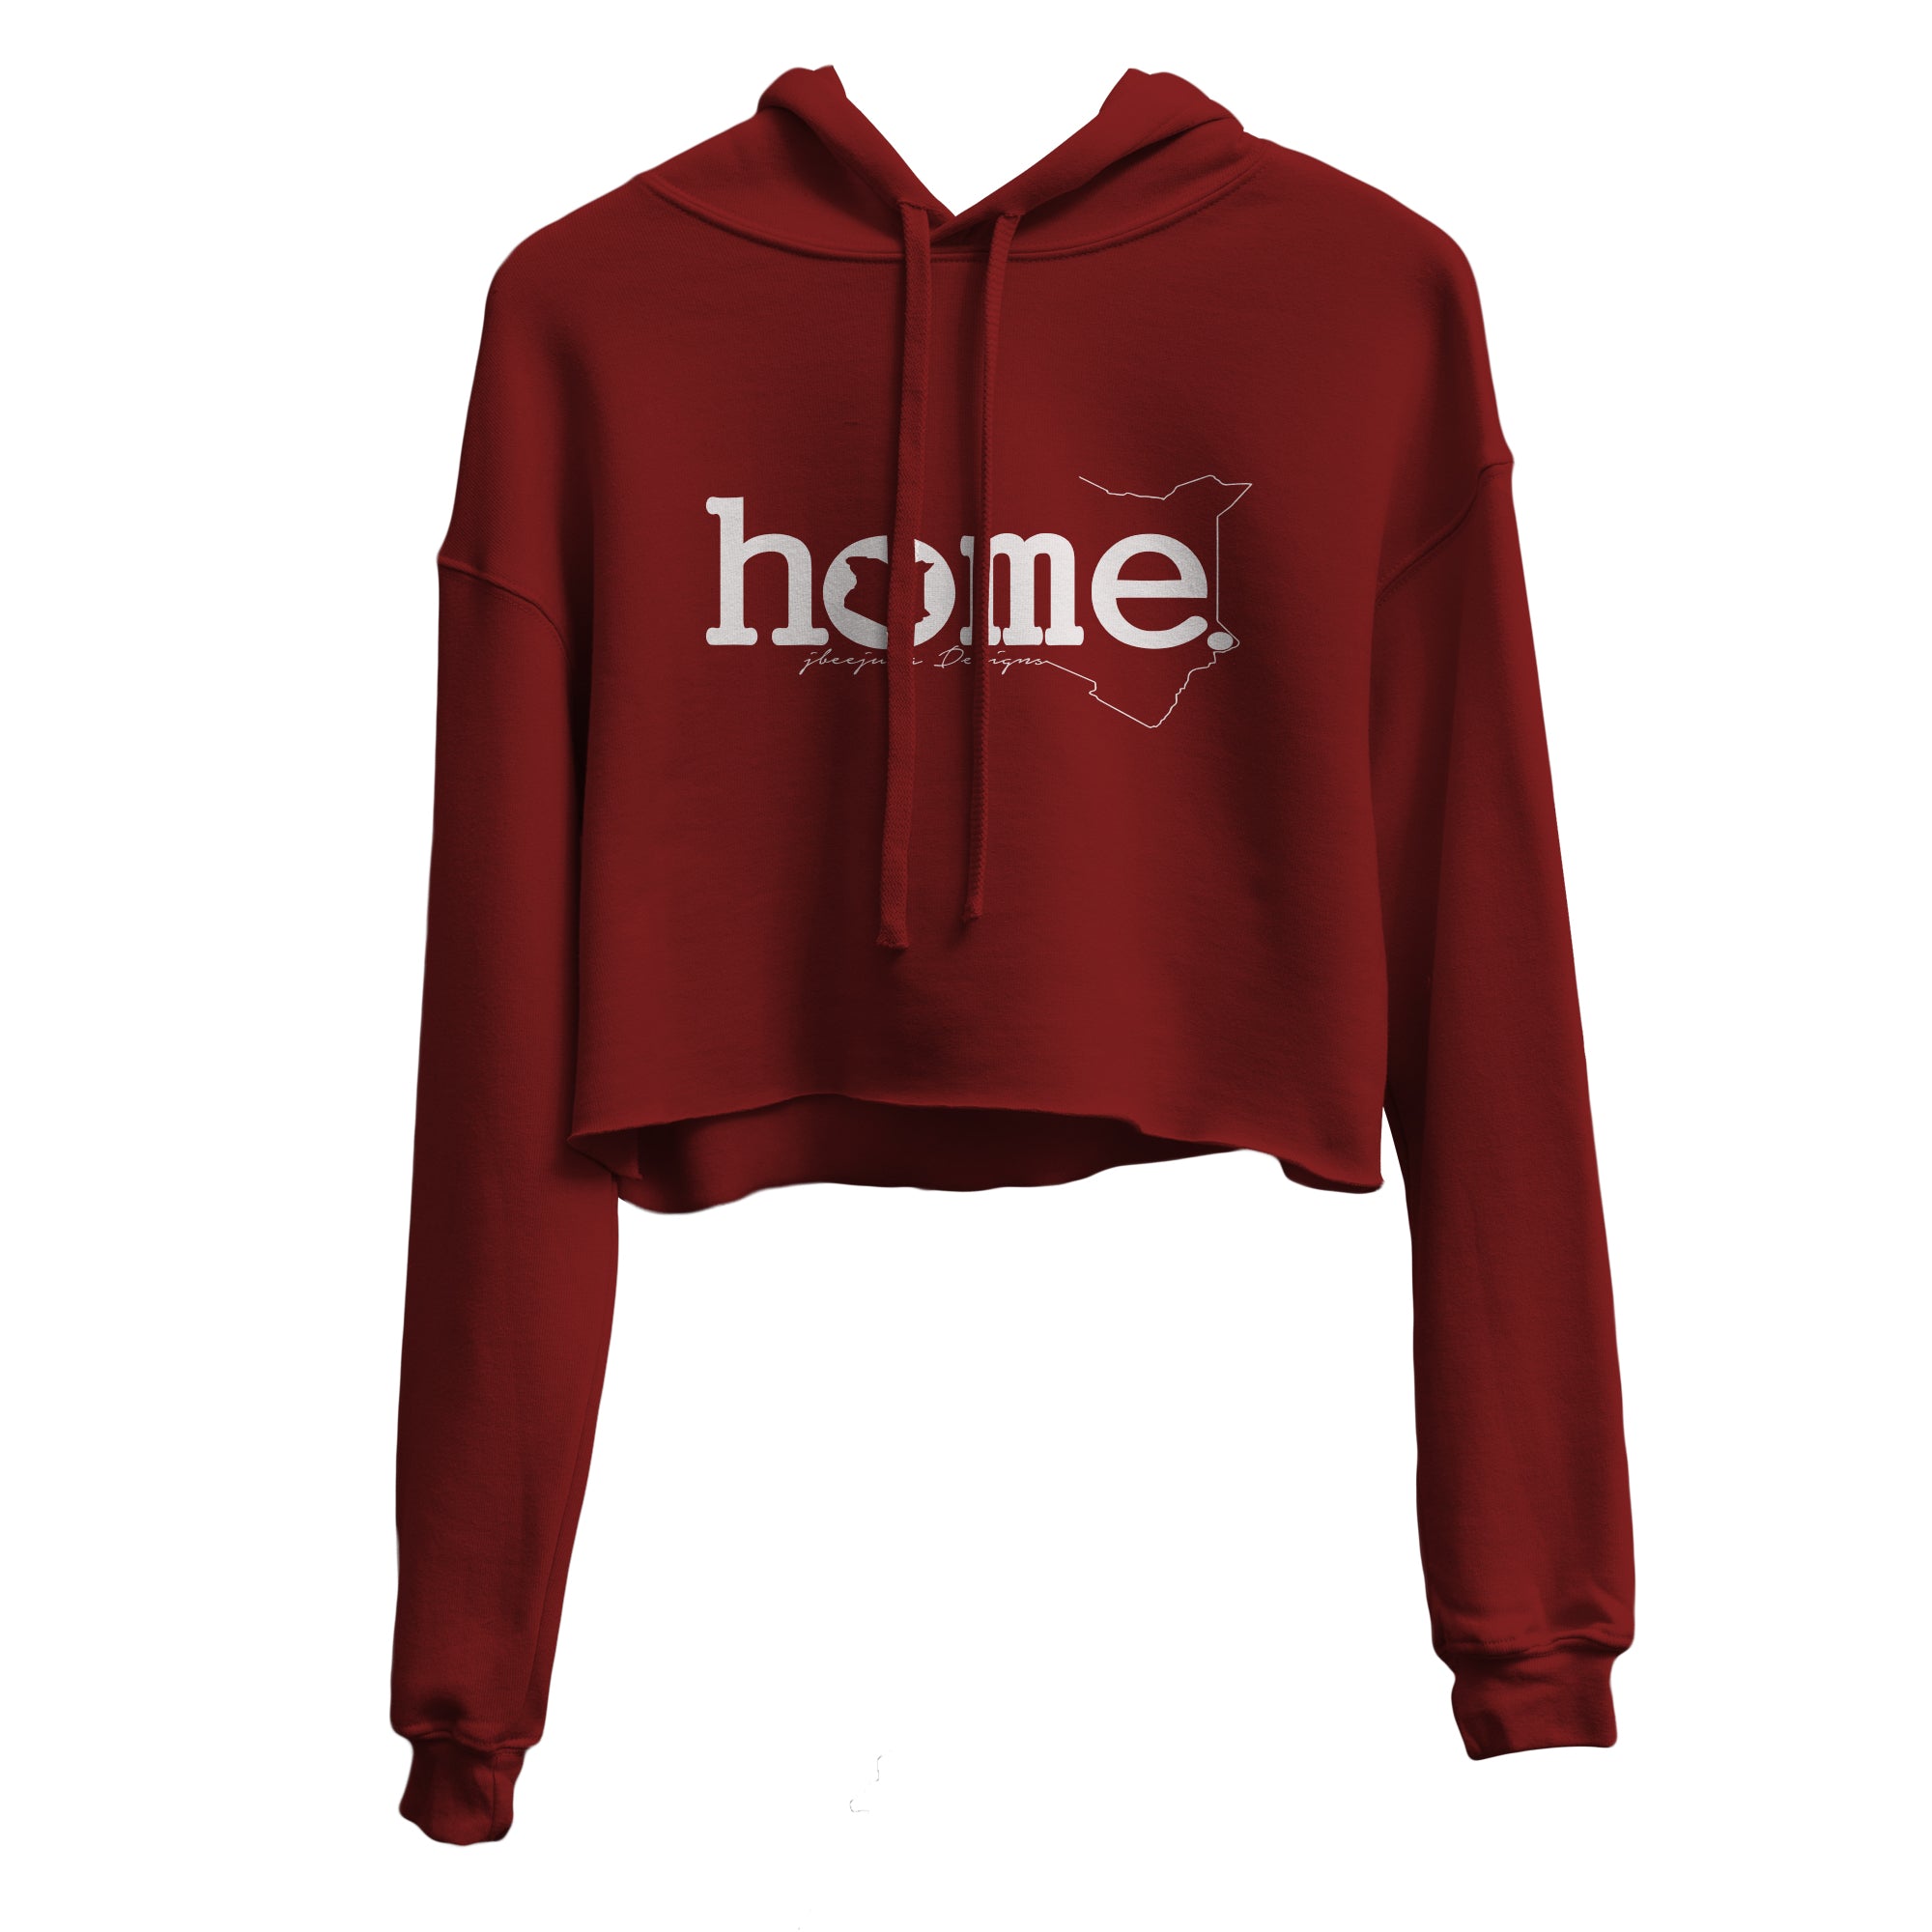 JBEEJURA DESINGZ | home_254 Burgundy Cropped Hoodie (heavy fabric) with a white classic words logo